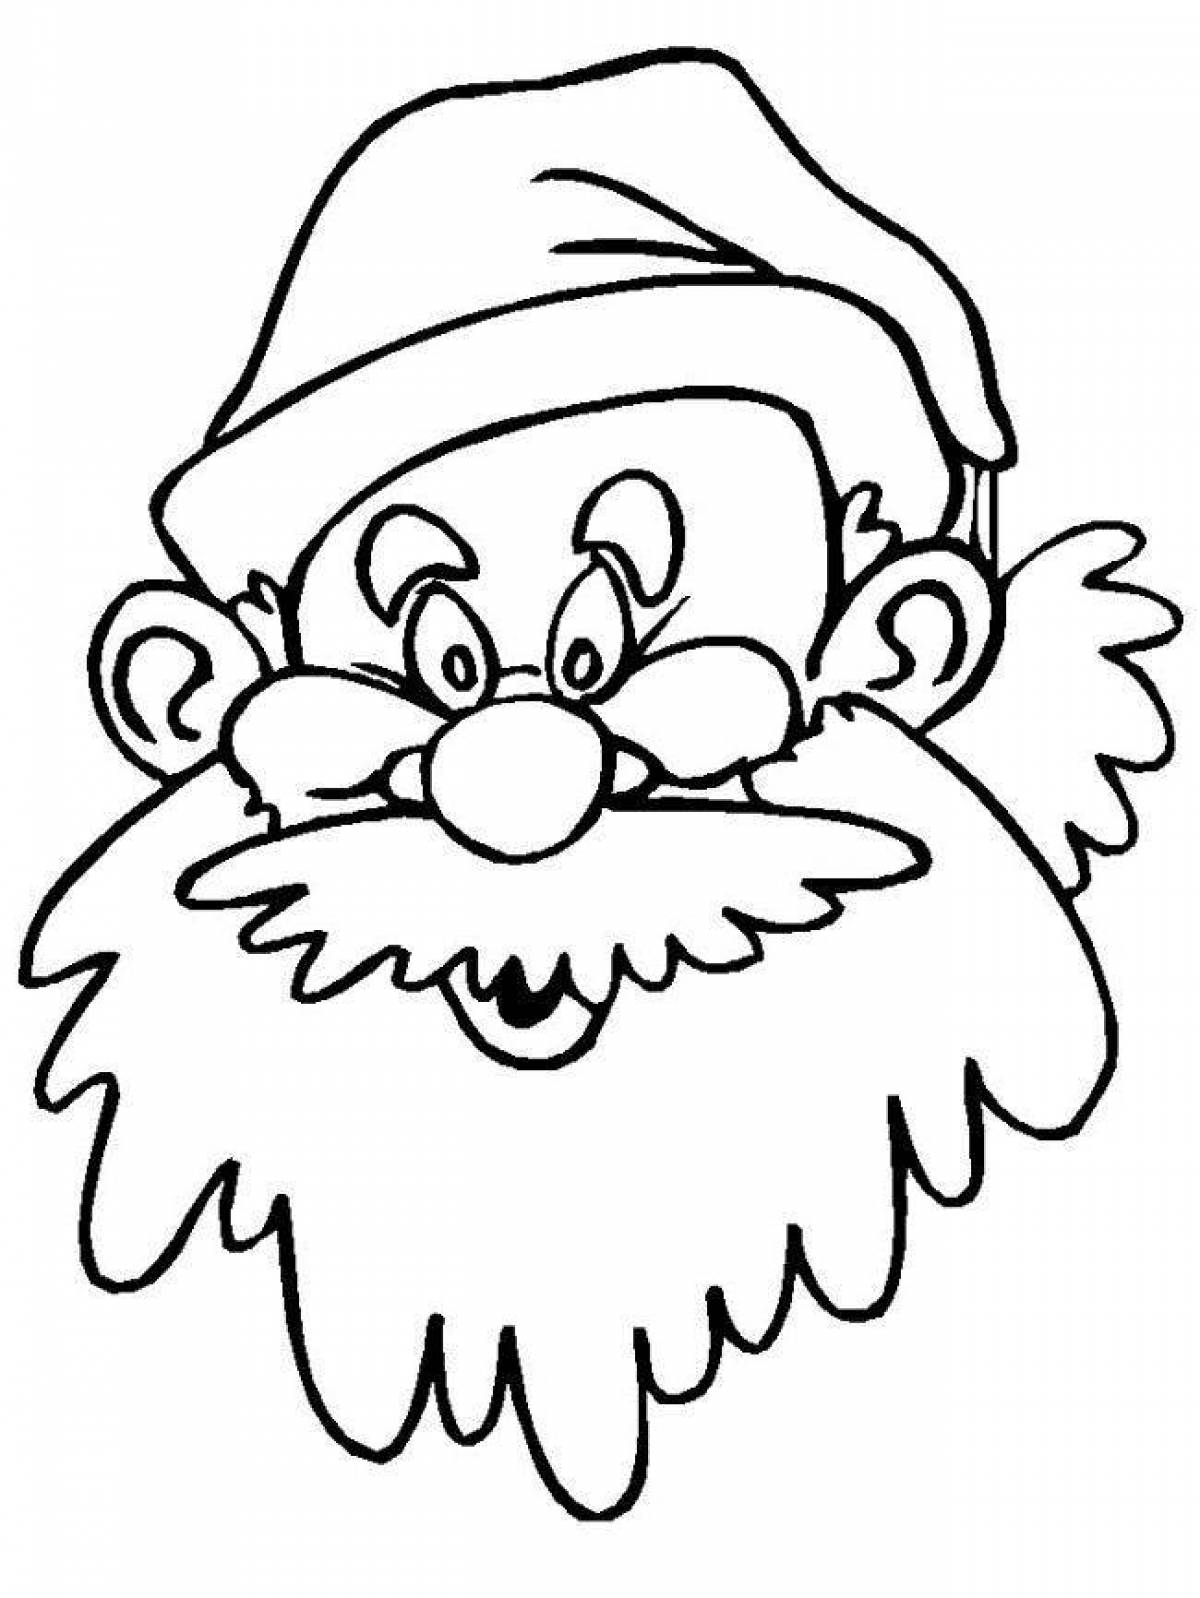 Exciting santa face coloring page